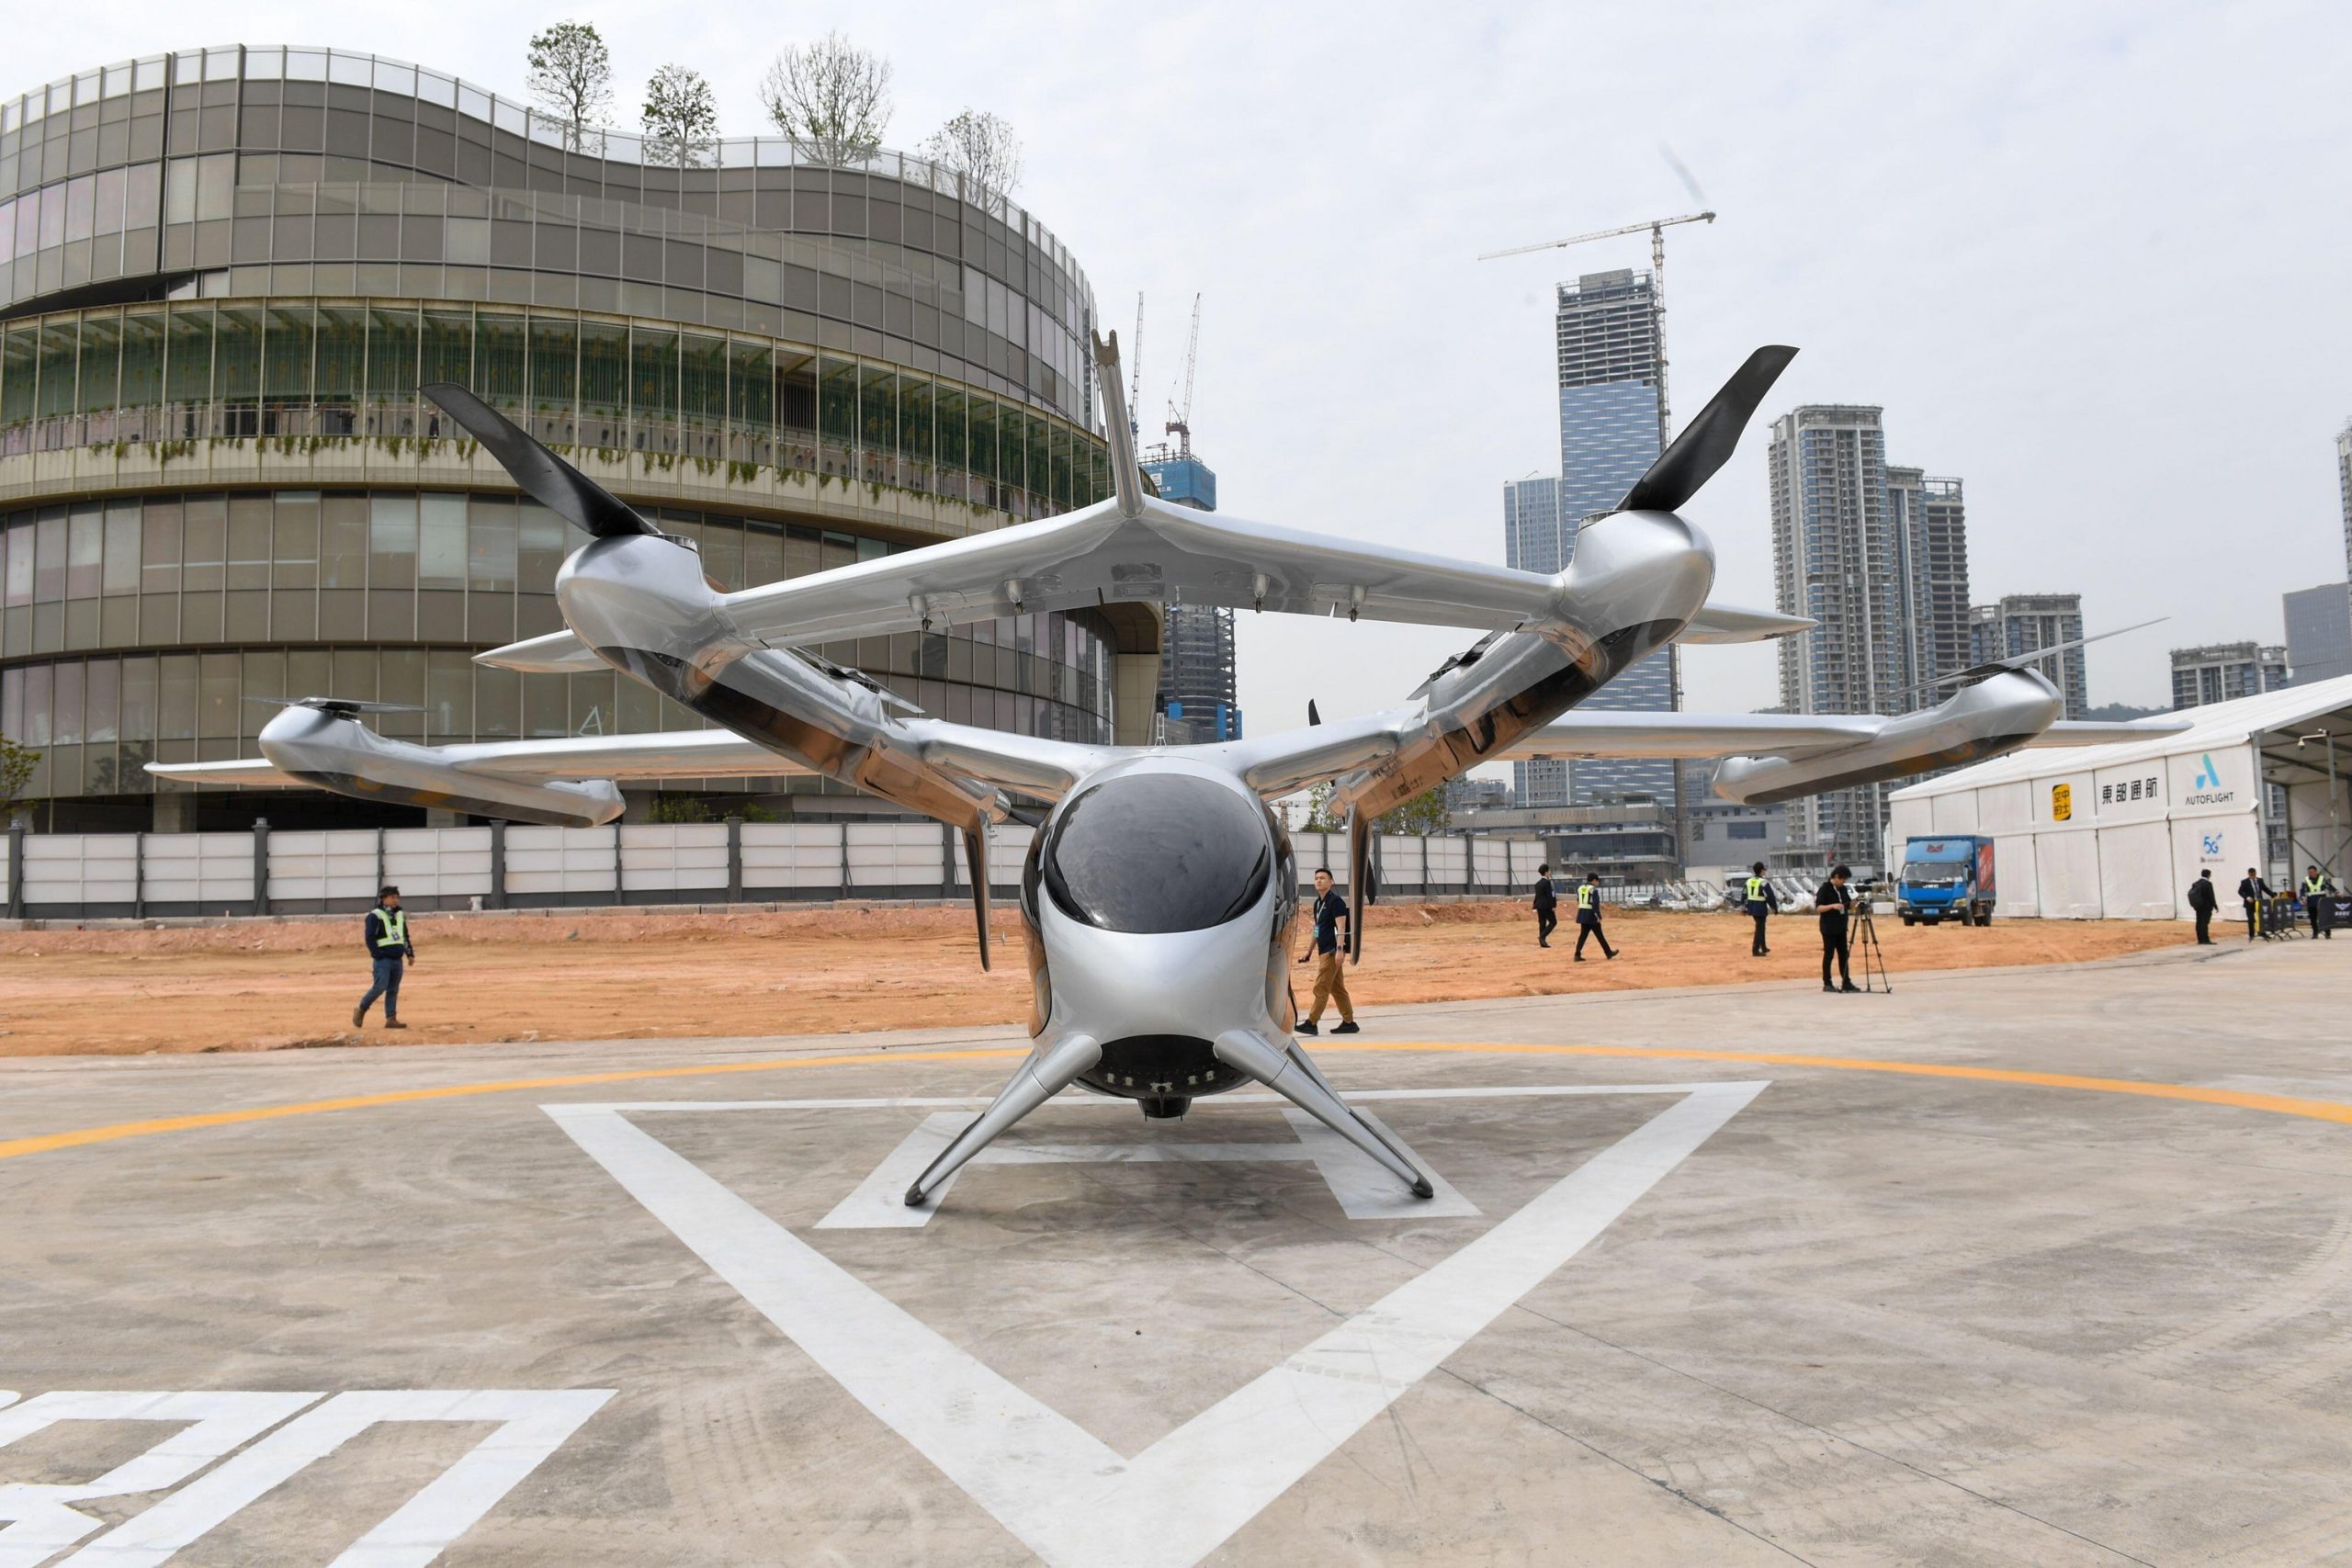 China unveils ‘omnicopter’ flying TAXIS with futuristic car-chopper-plane hybrids to ferry passengers between cities